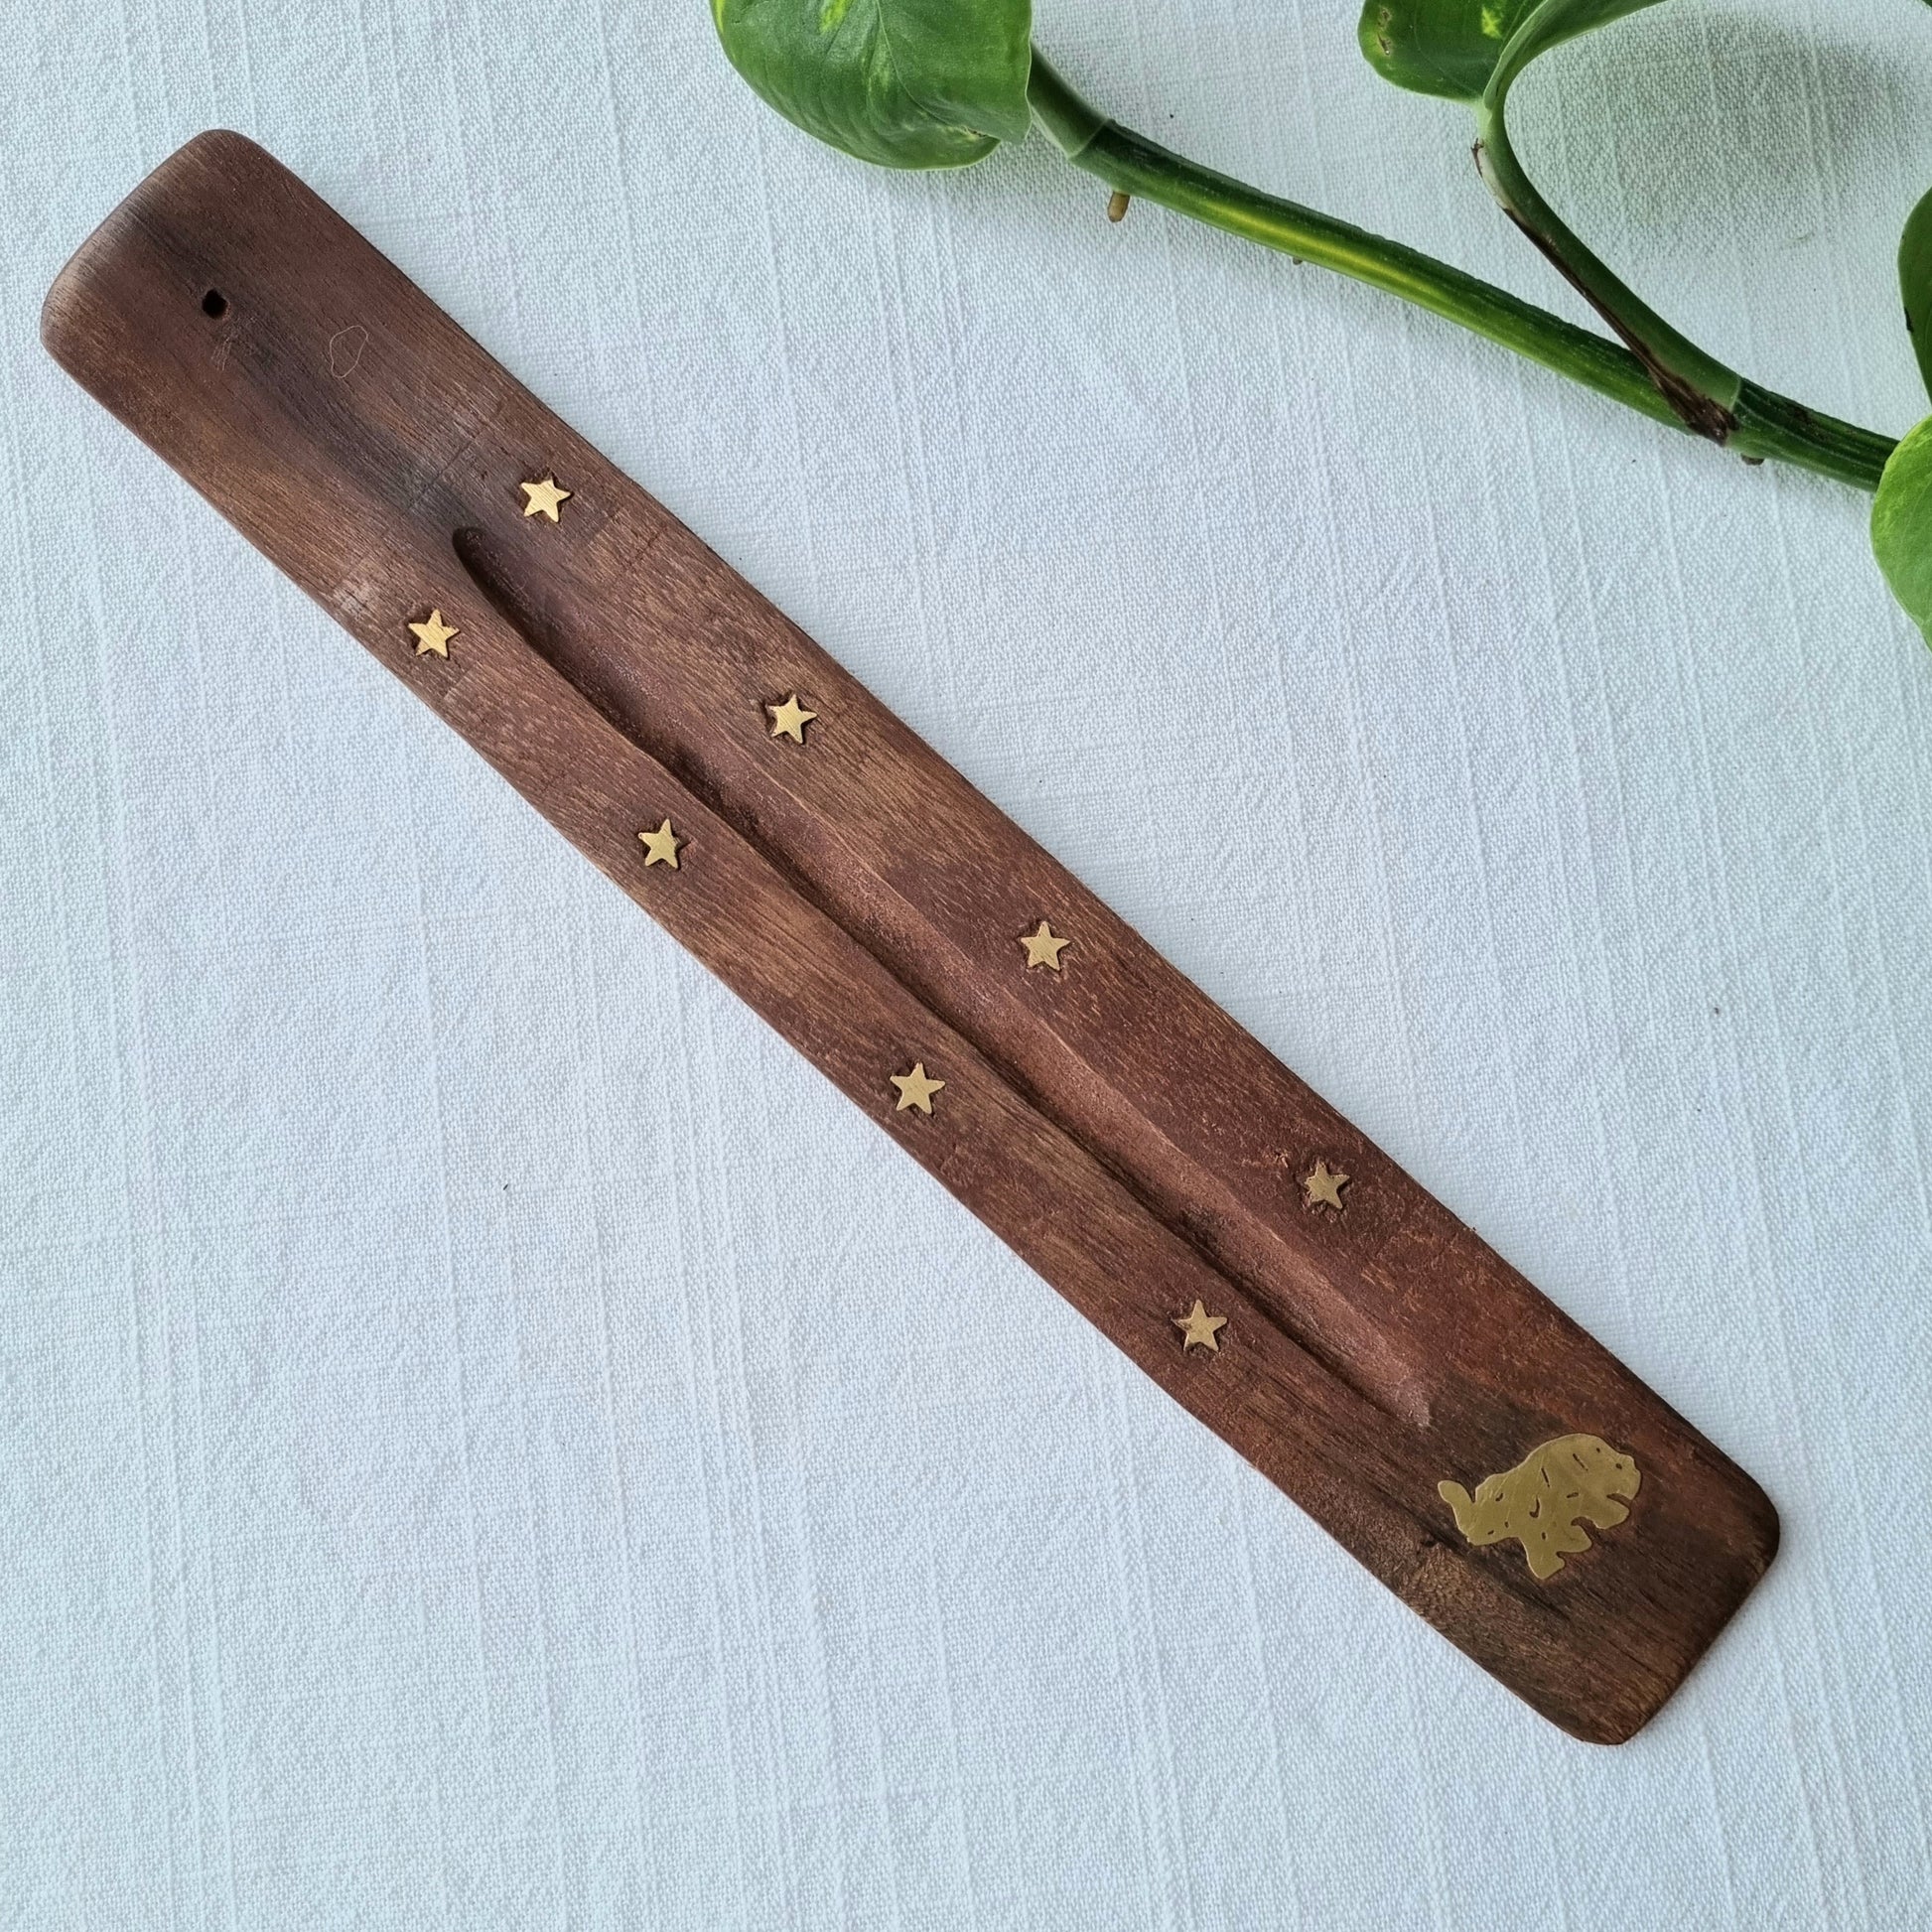 Incense holder/ash catcher - wooden with brass inlay design - Sparrow and Fox